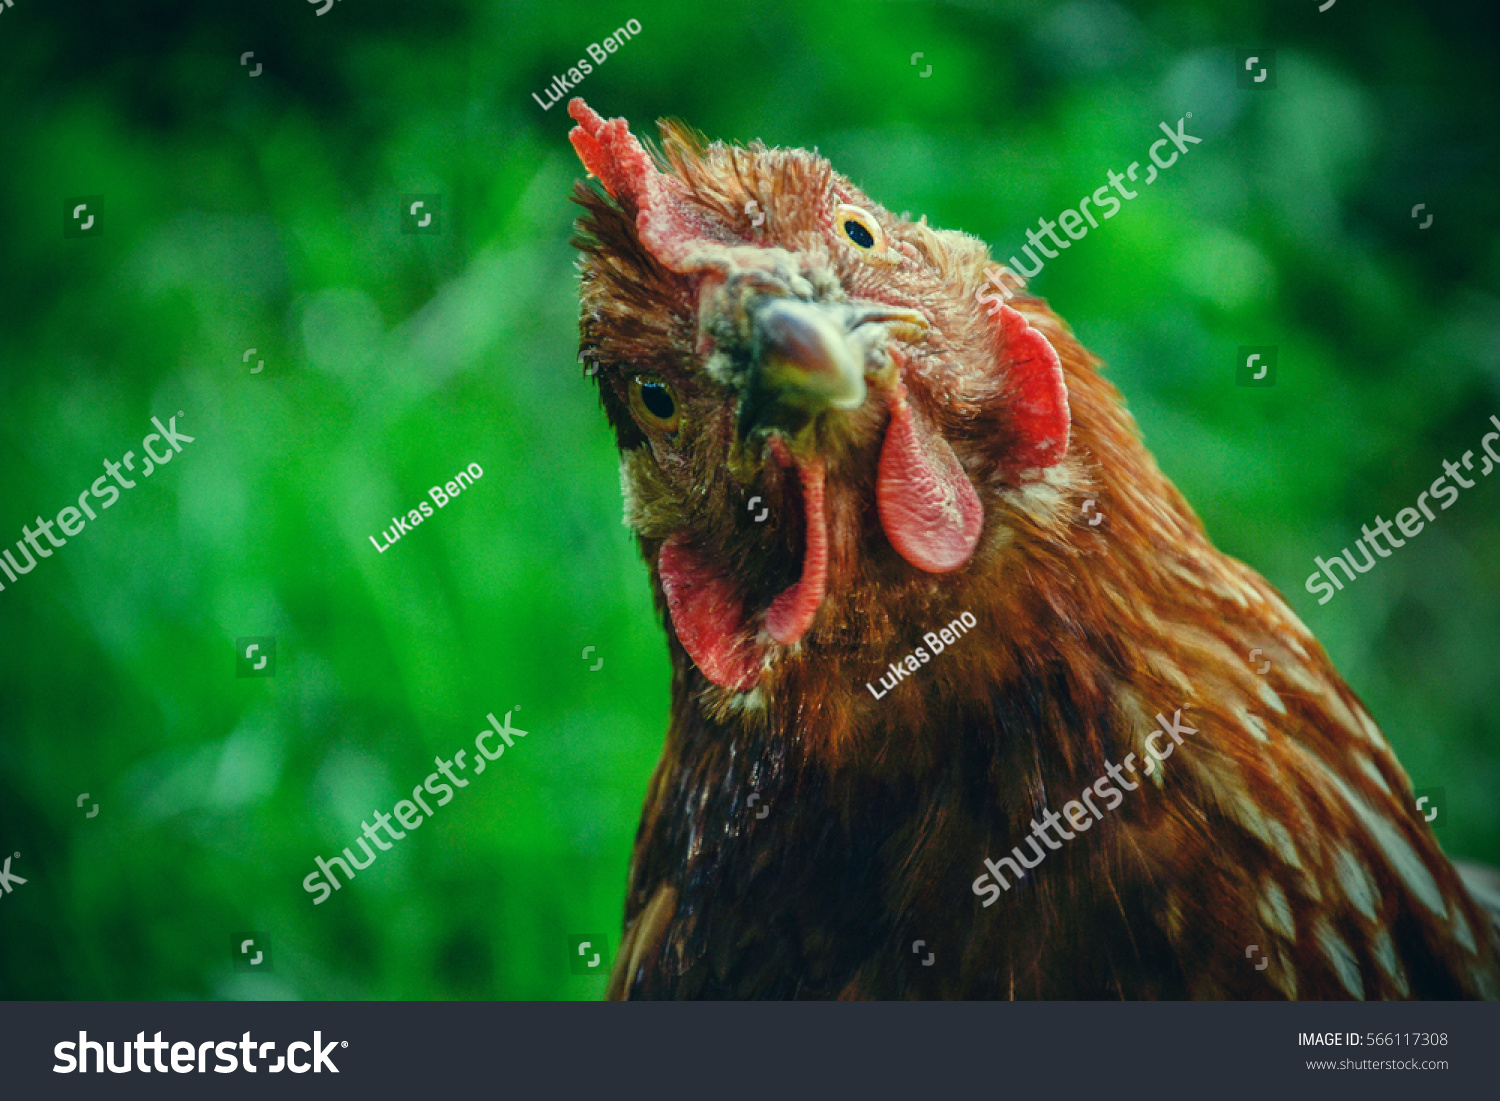 Hens feed on the traditional rural barnyard at sunny day. Detail of hen head. Chickens sitting in henhouse. Close up of chicken standing on barn yard with the chicken coop. Free range poultry farming #566117308